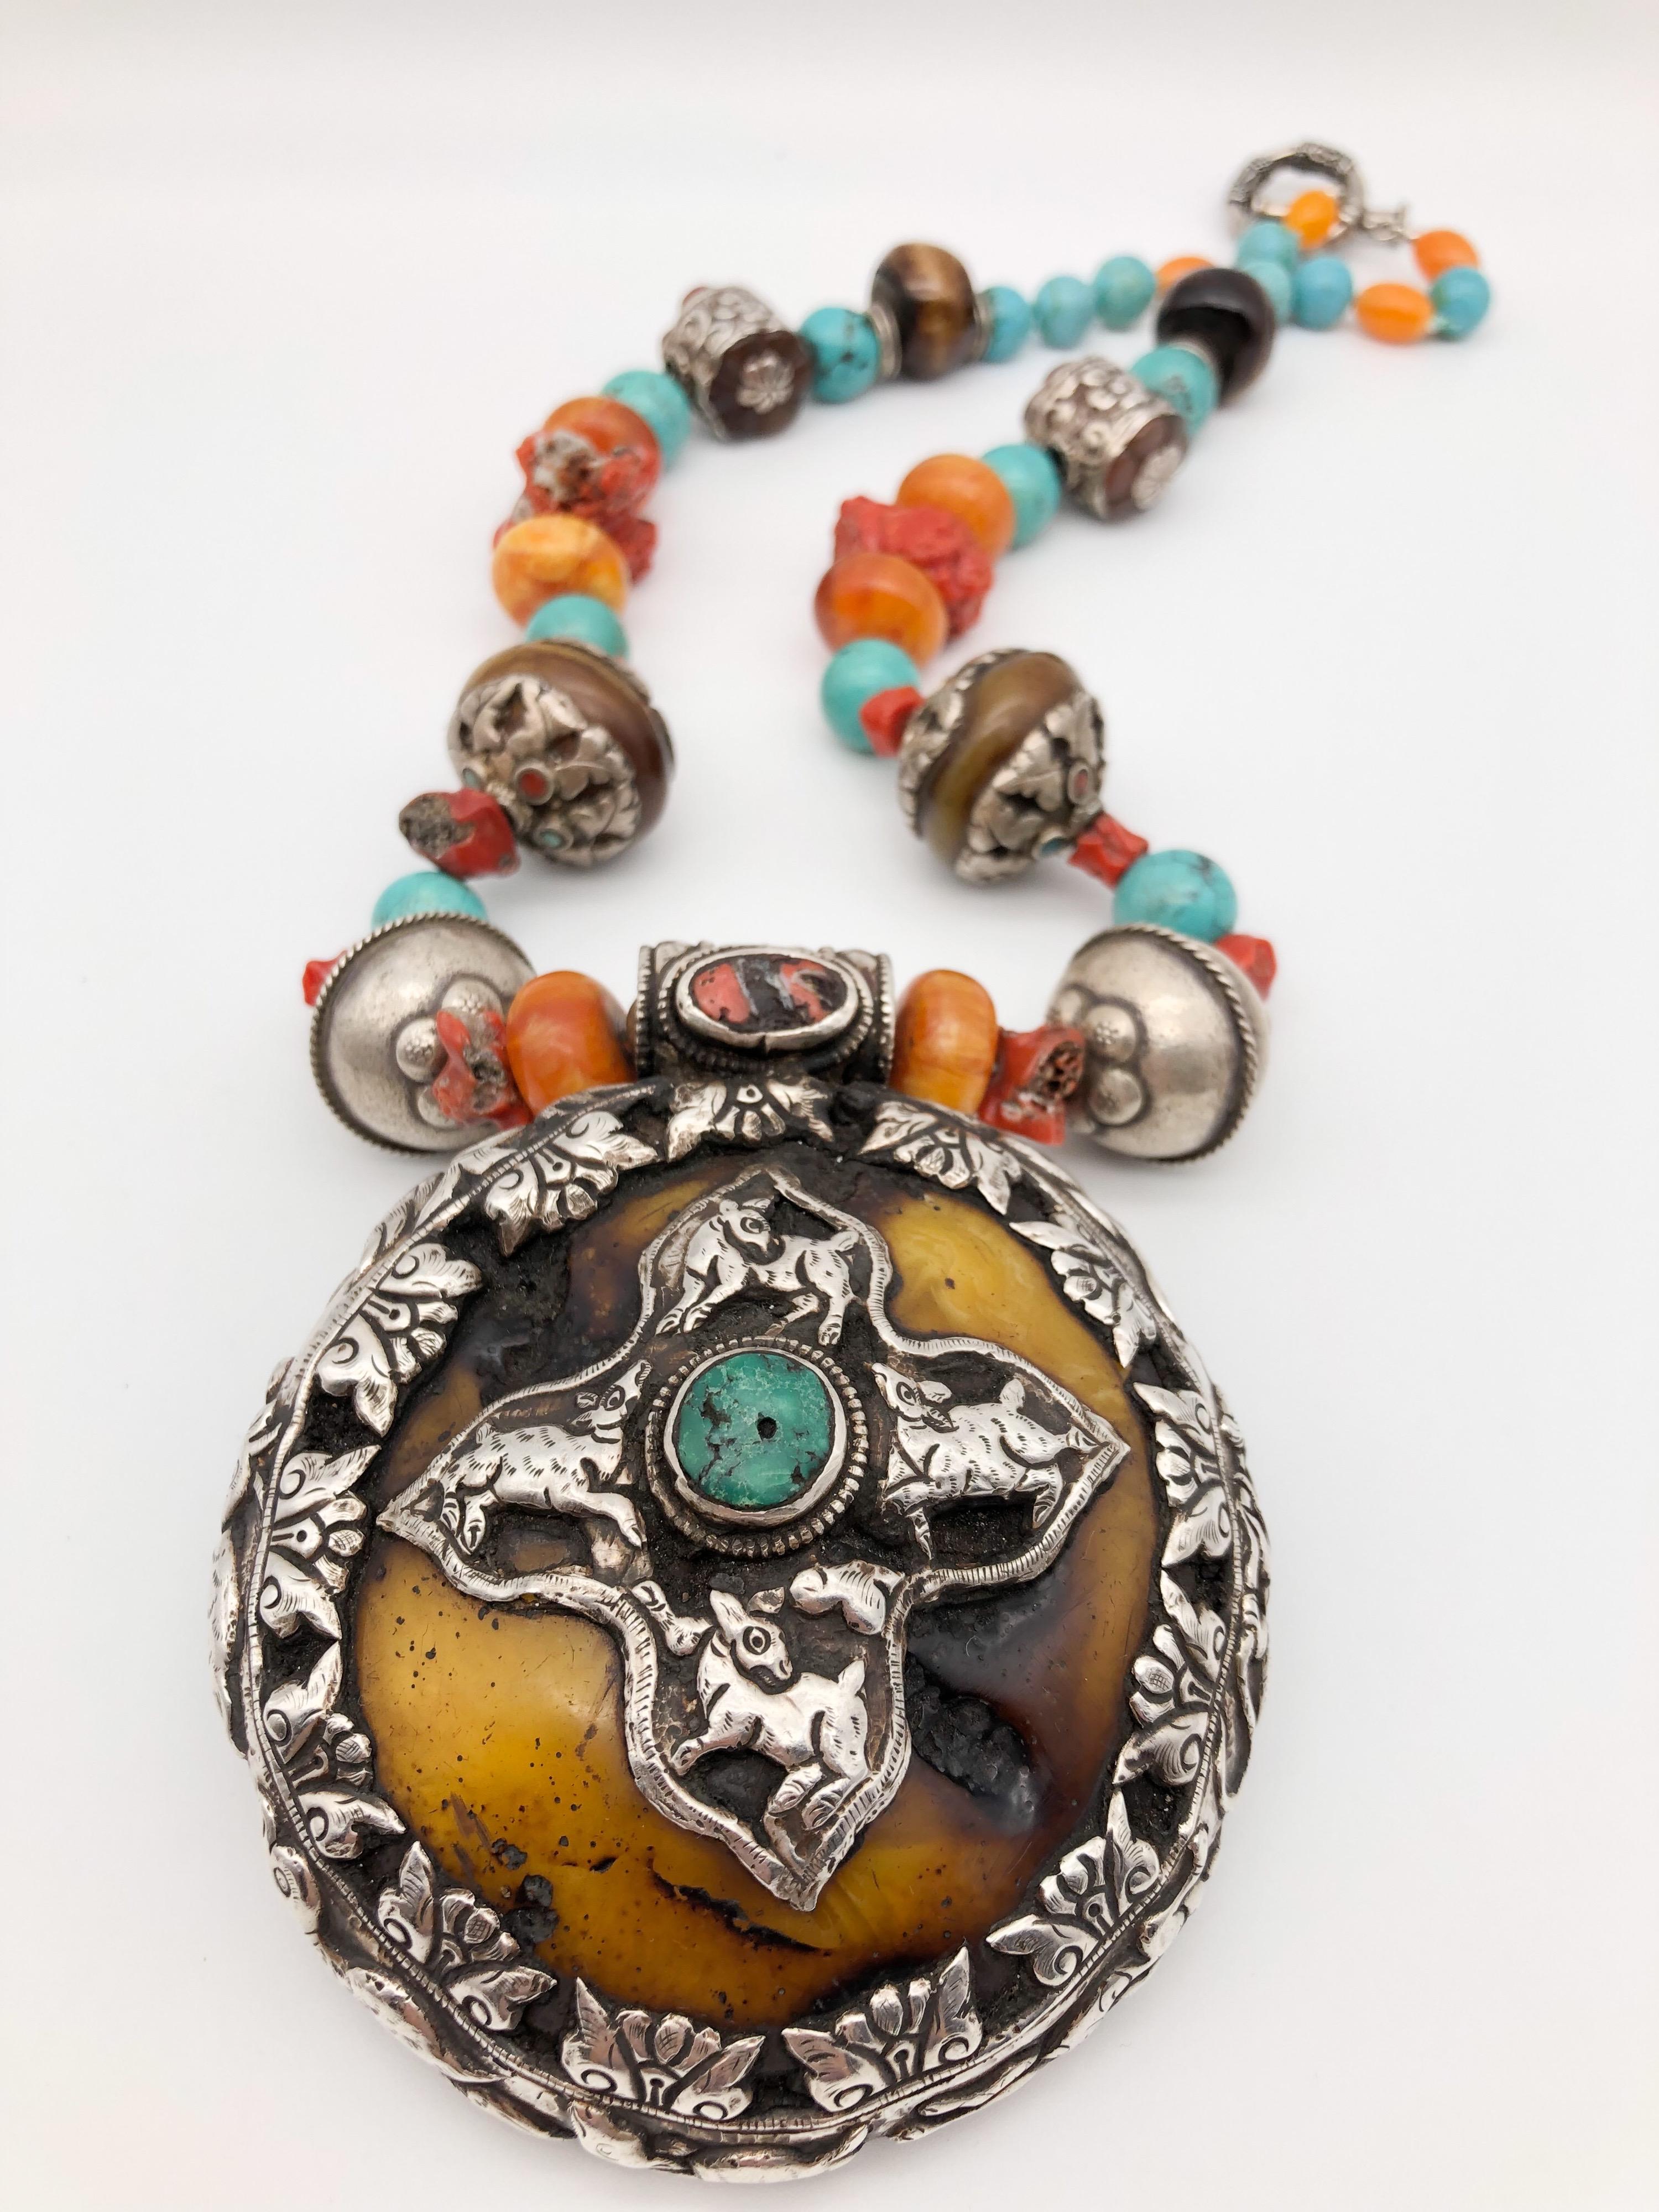 A.Jeschel Magnificent necklace with Tibetan Bold Sterling Silver Pendant For Sale 1